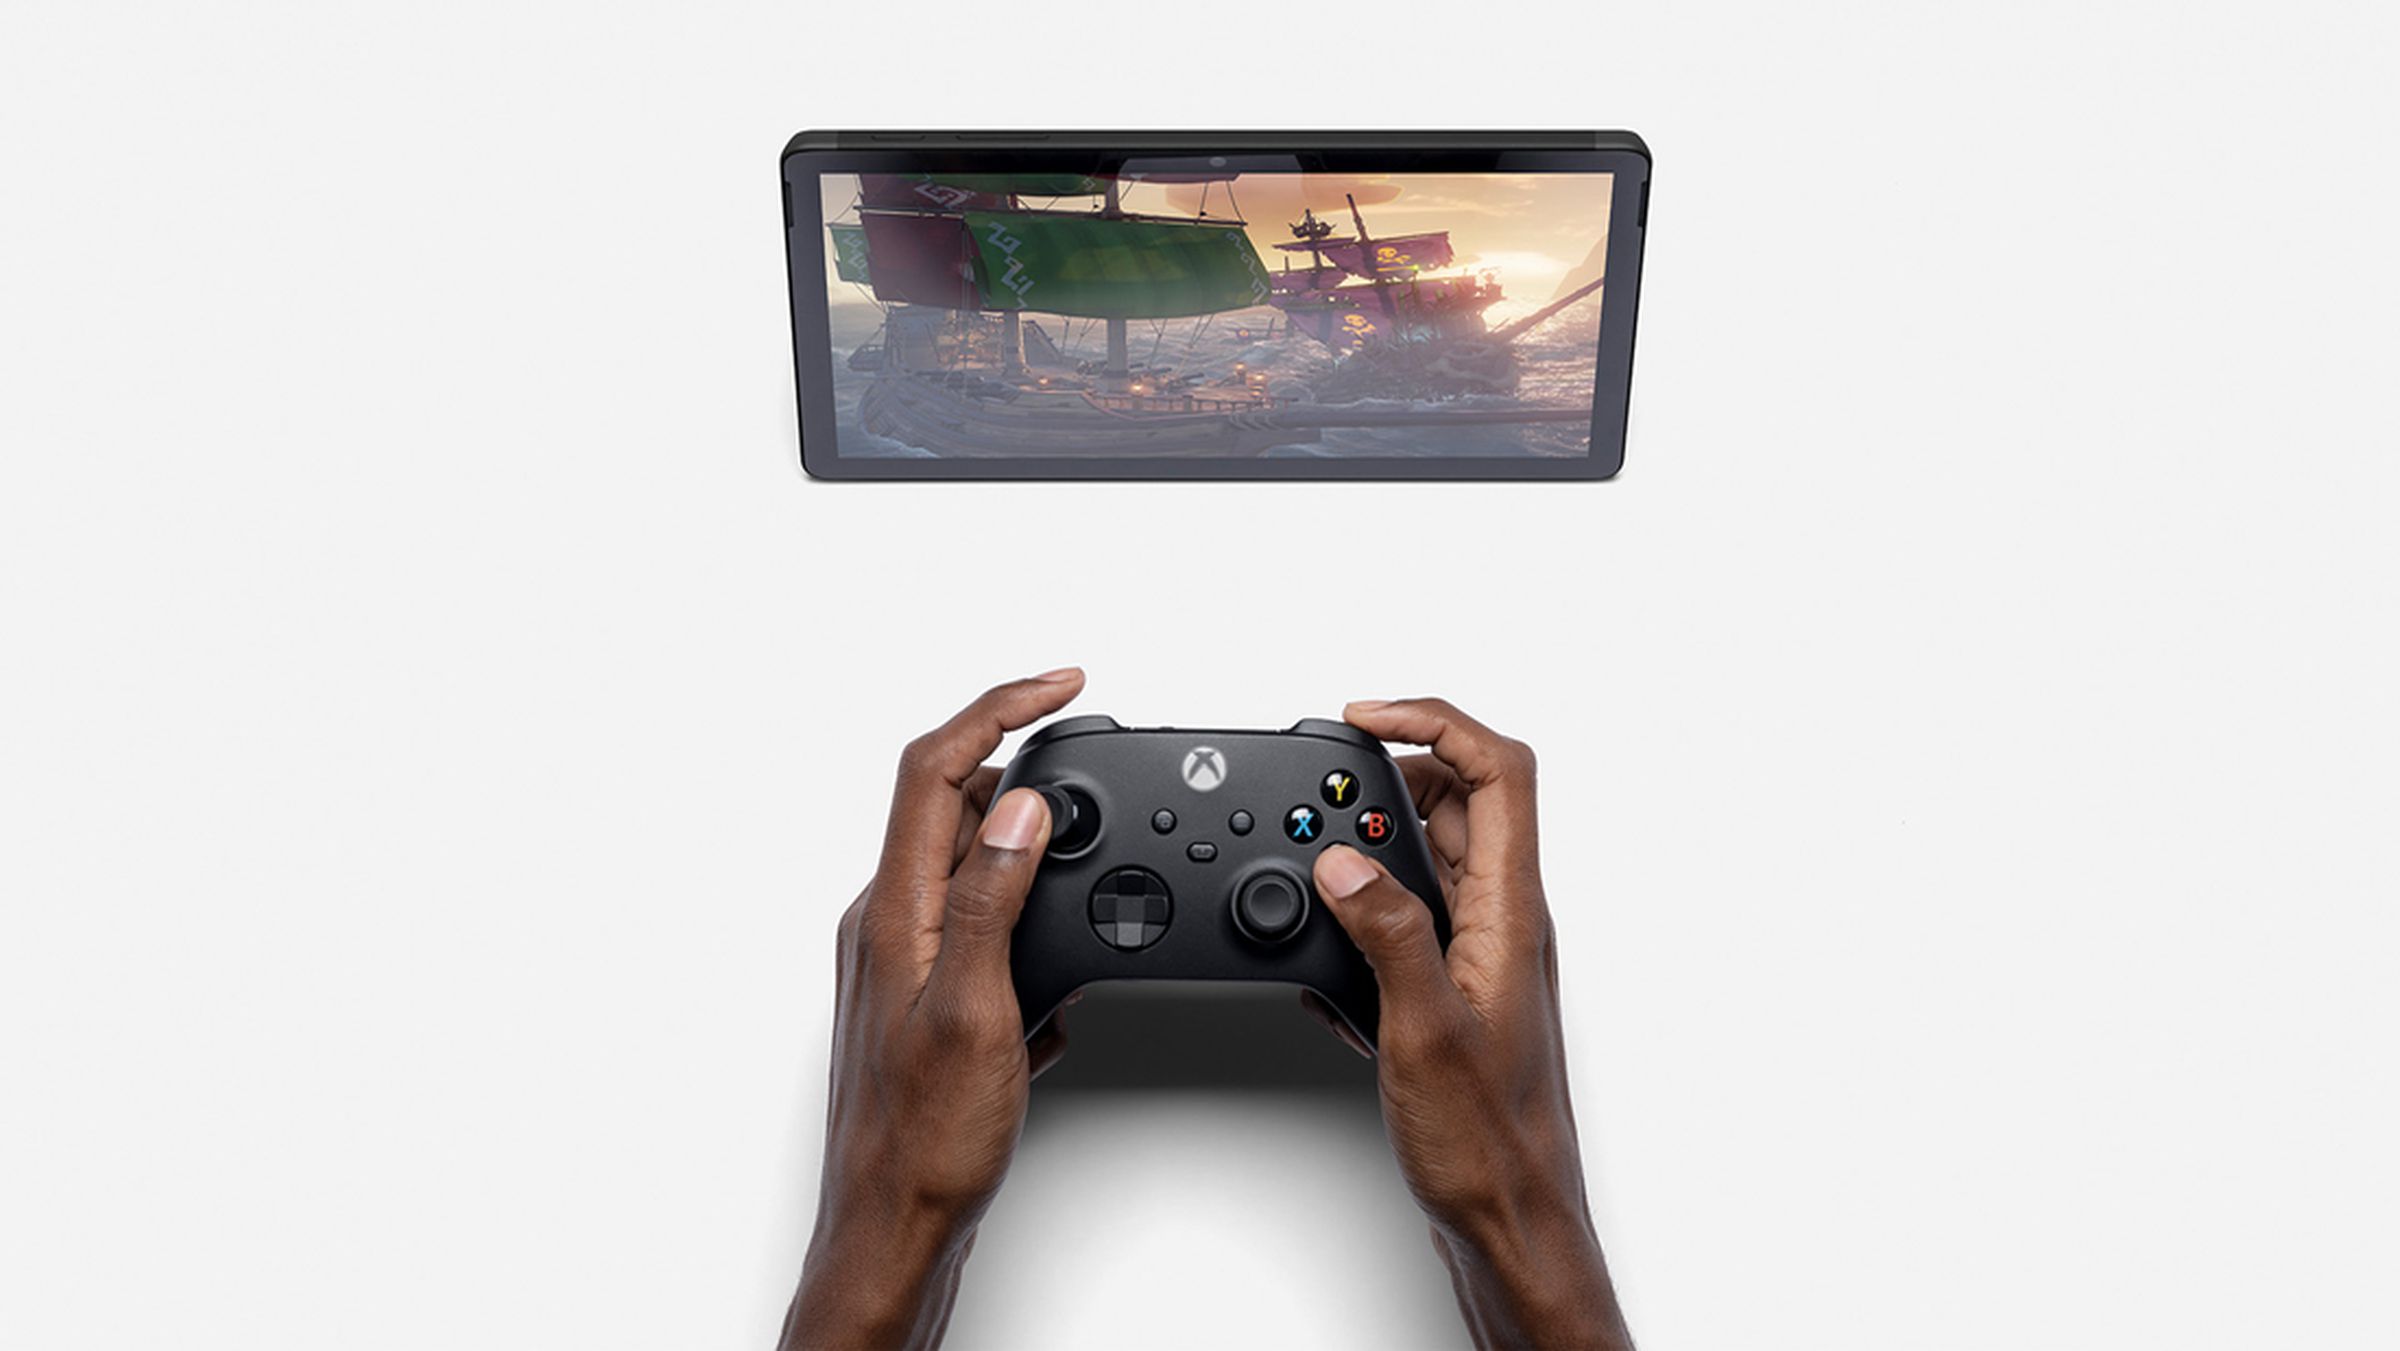 A game streamed over Xbox Cloud Gaming on a tablet